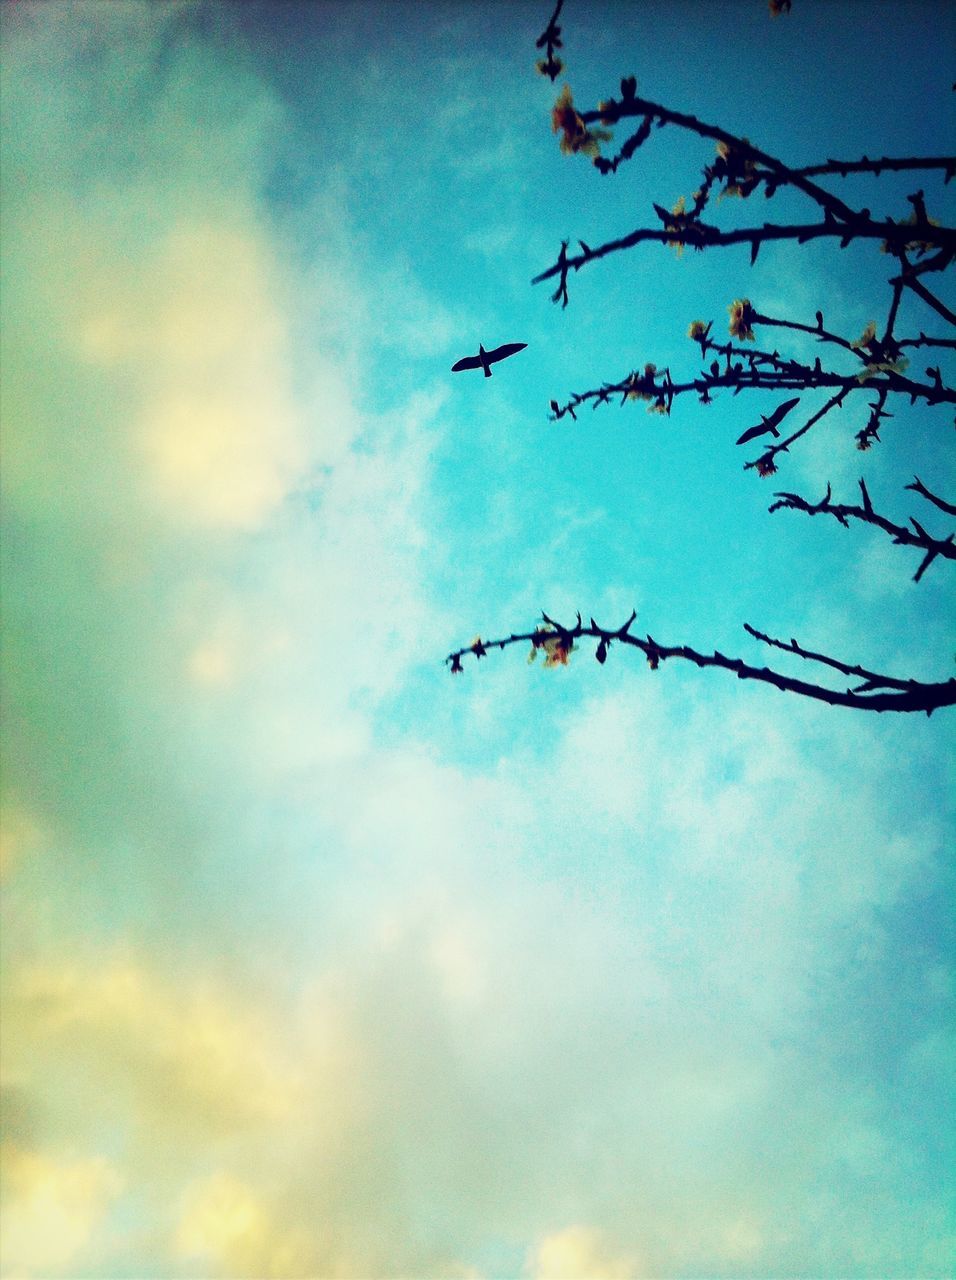 low angle view, sky, silhouette, blue, cloud - sky, nature, cloud, dusk, outdoors, beauty in nature, no people, bird, flying, tranquility, sunset, day, cloudy, branch, tree, bare tree